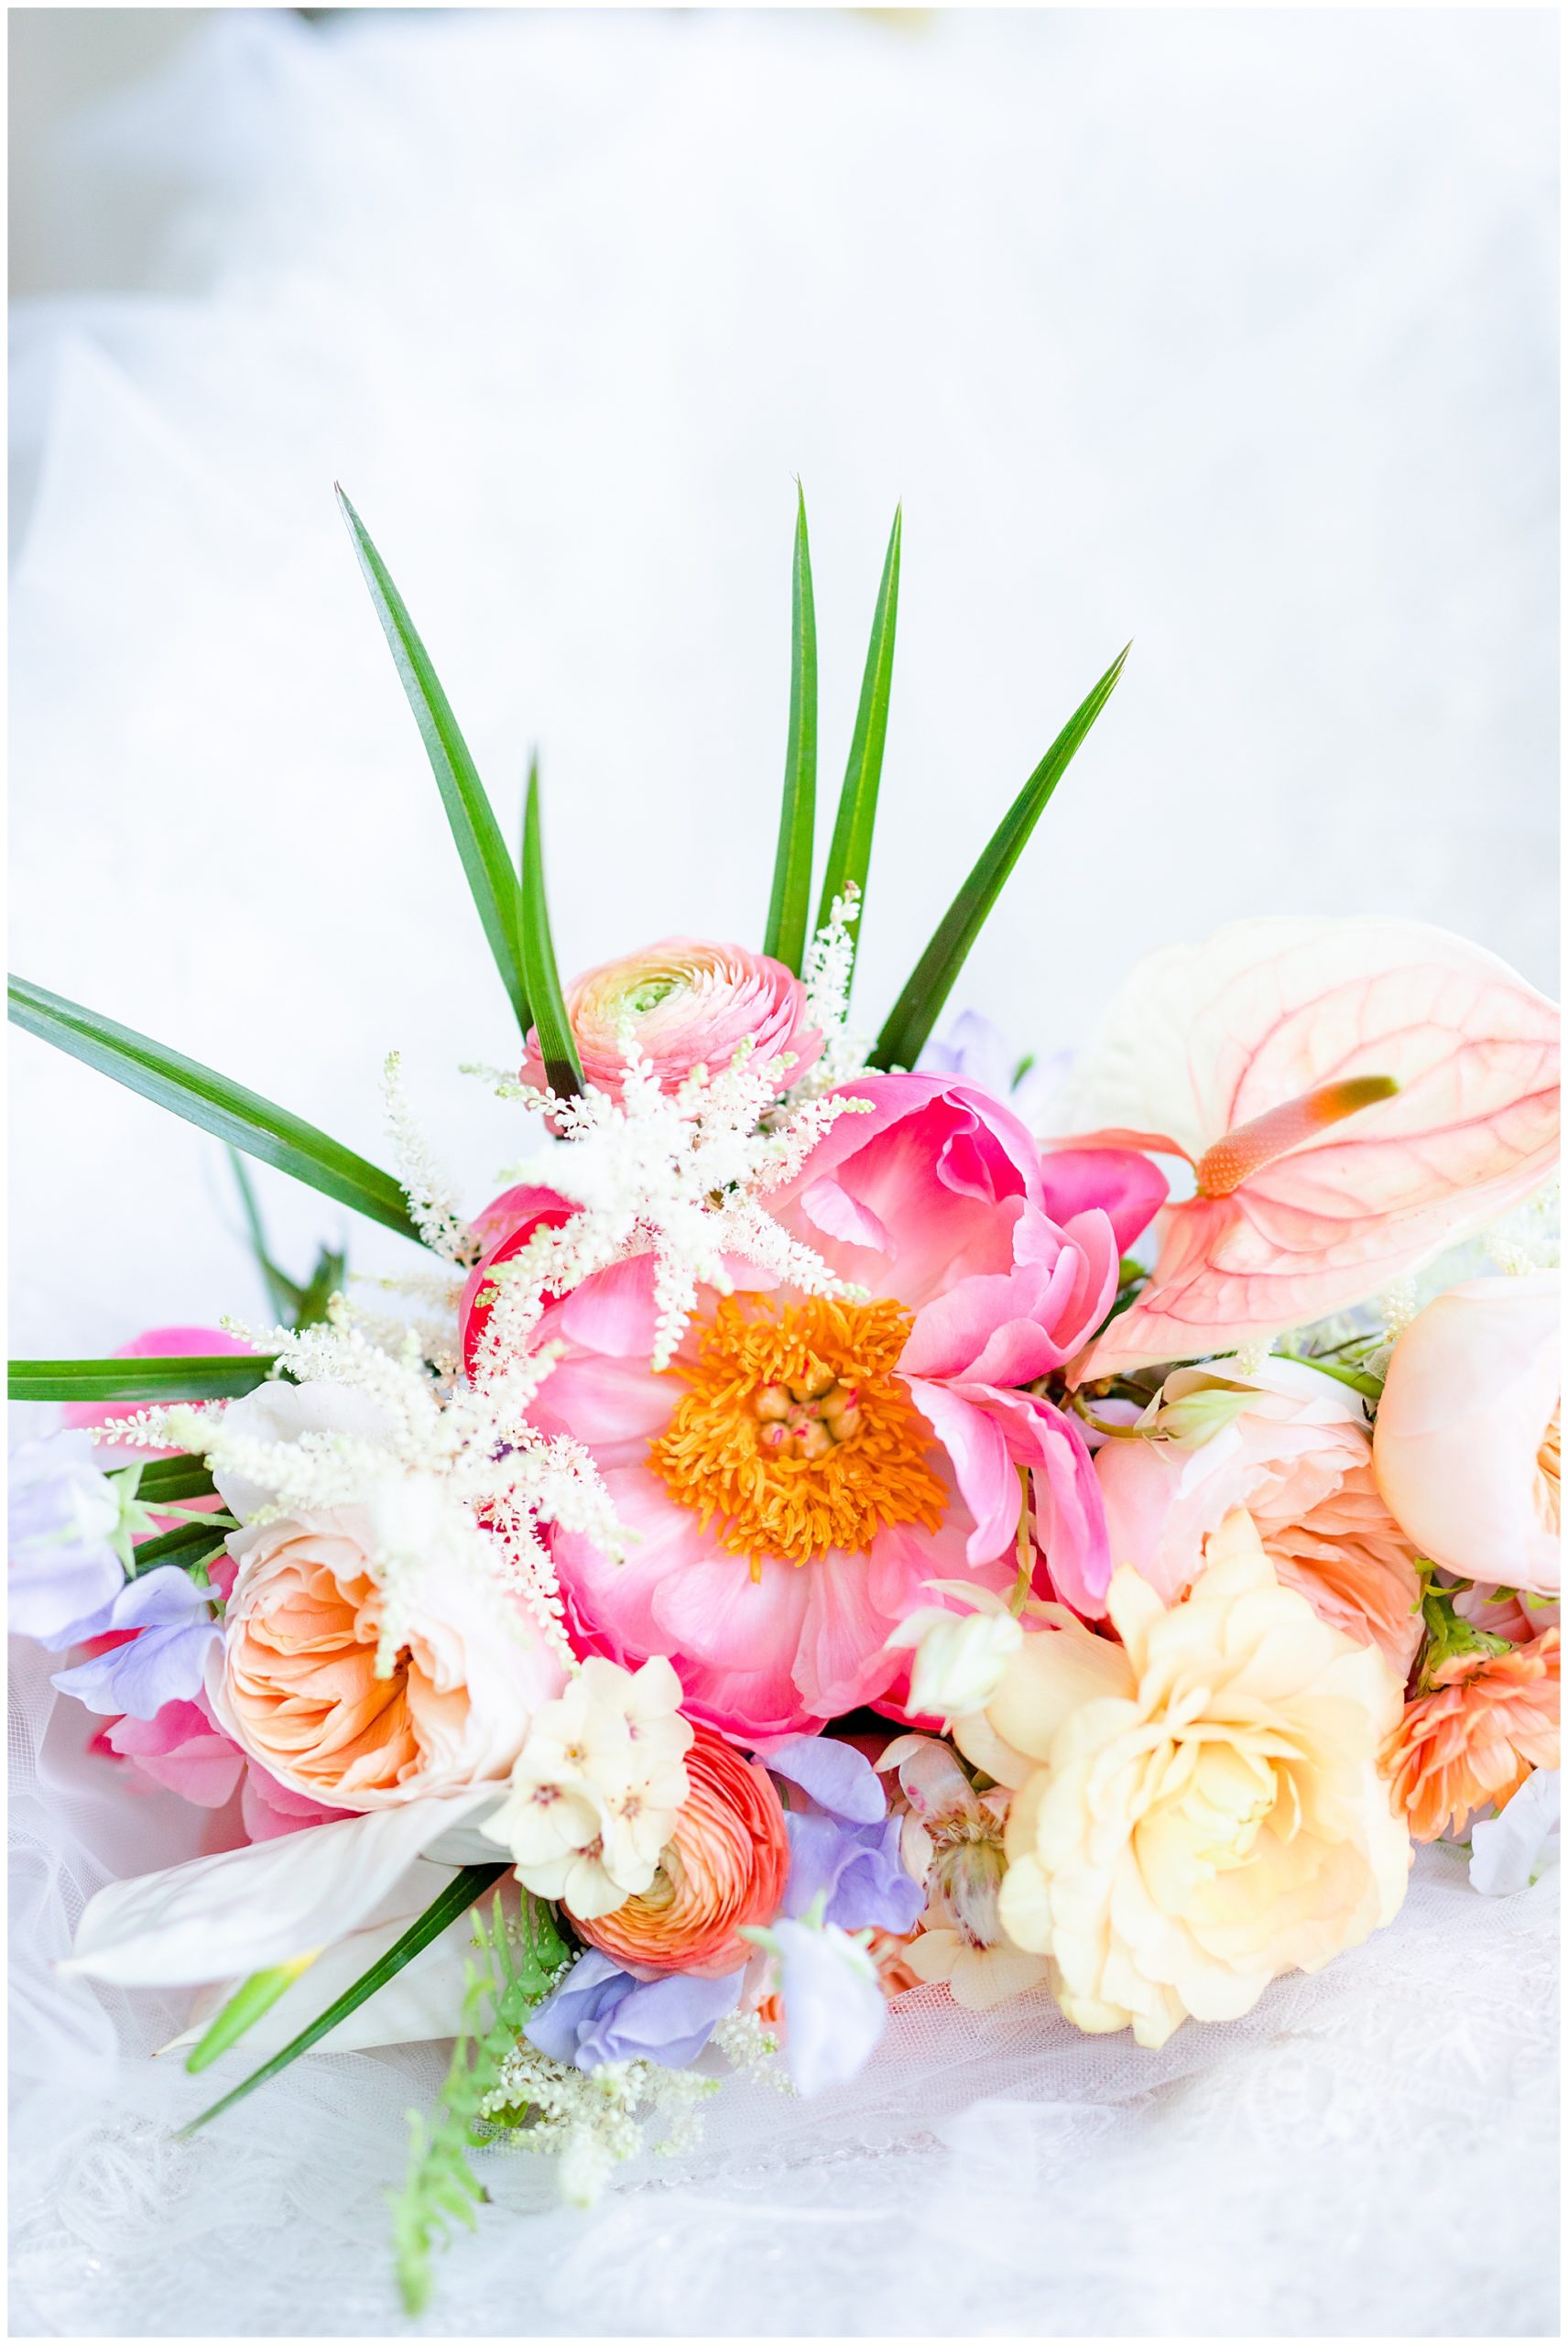 picture perfect wedding bouquet, bridal bouquets, bridal bouquet ideas, wedding bouquet ideas, wedding ideas, wedding details, wedding colors, color schemes, wedding planning, ideas for weddings, bouquets, wedding photography tips, wedding tips, wedding photography ideas, vibrant bouquet, bright colored flowers, peonies, summer bouquet